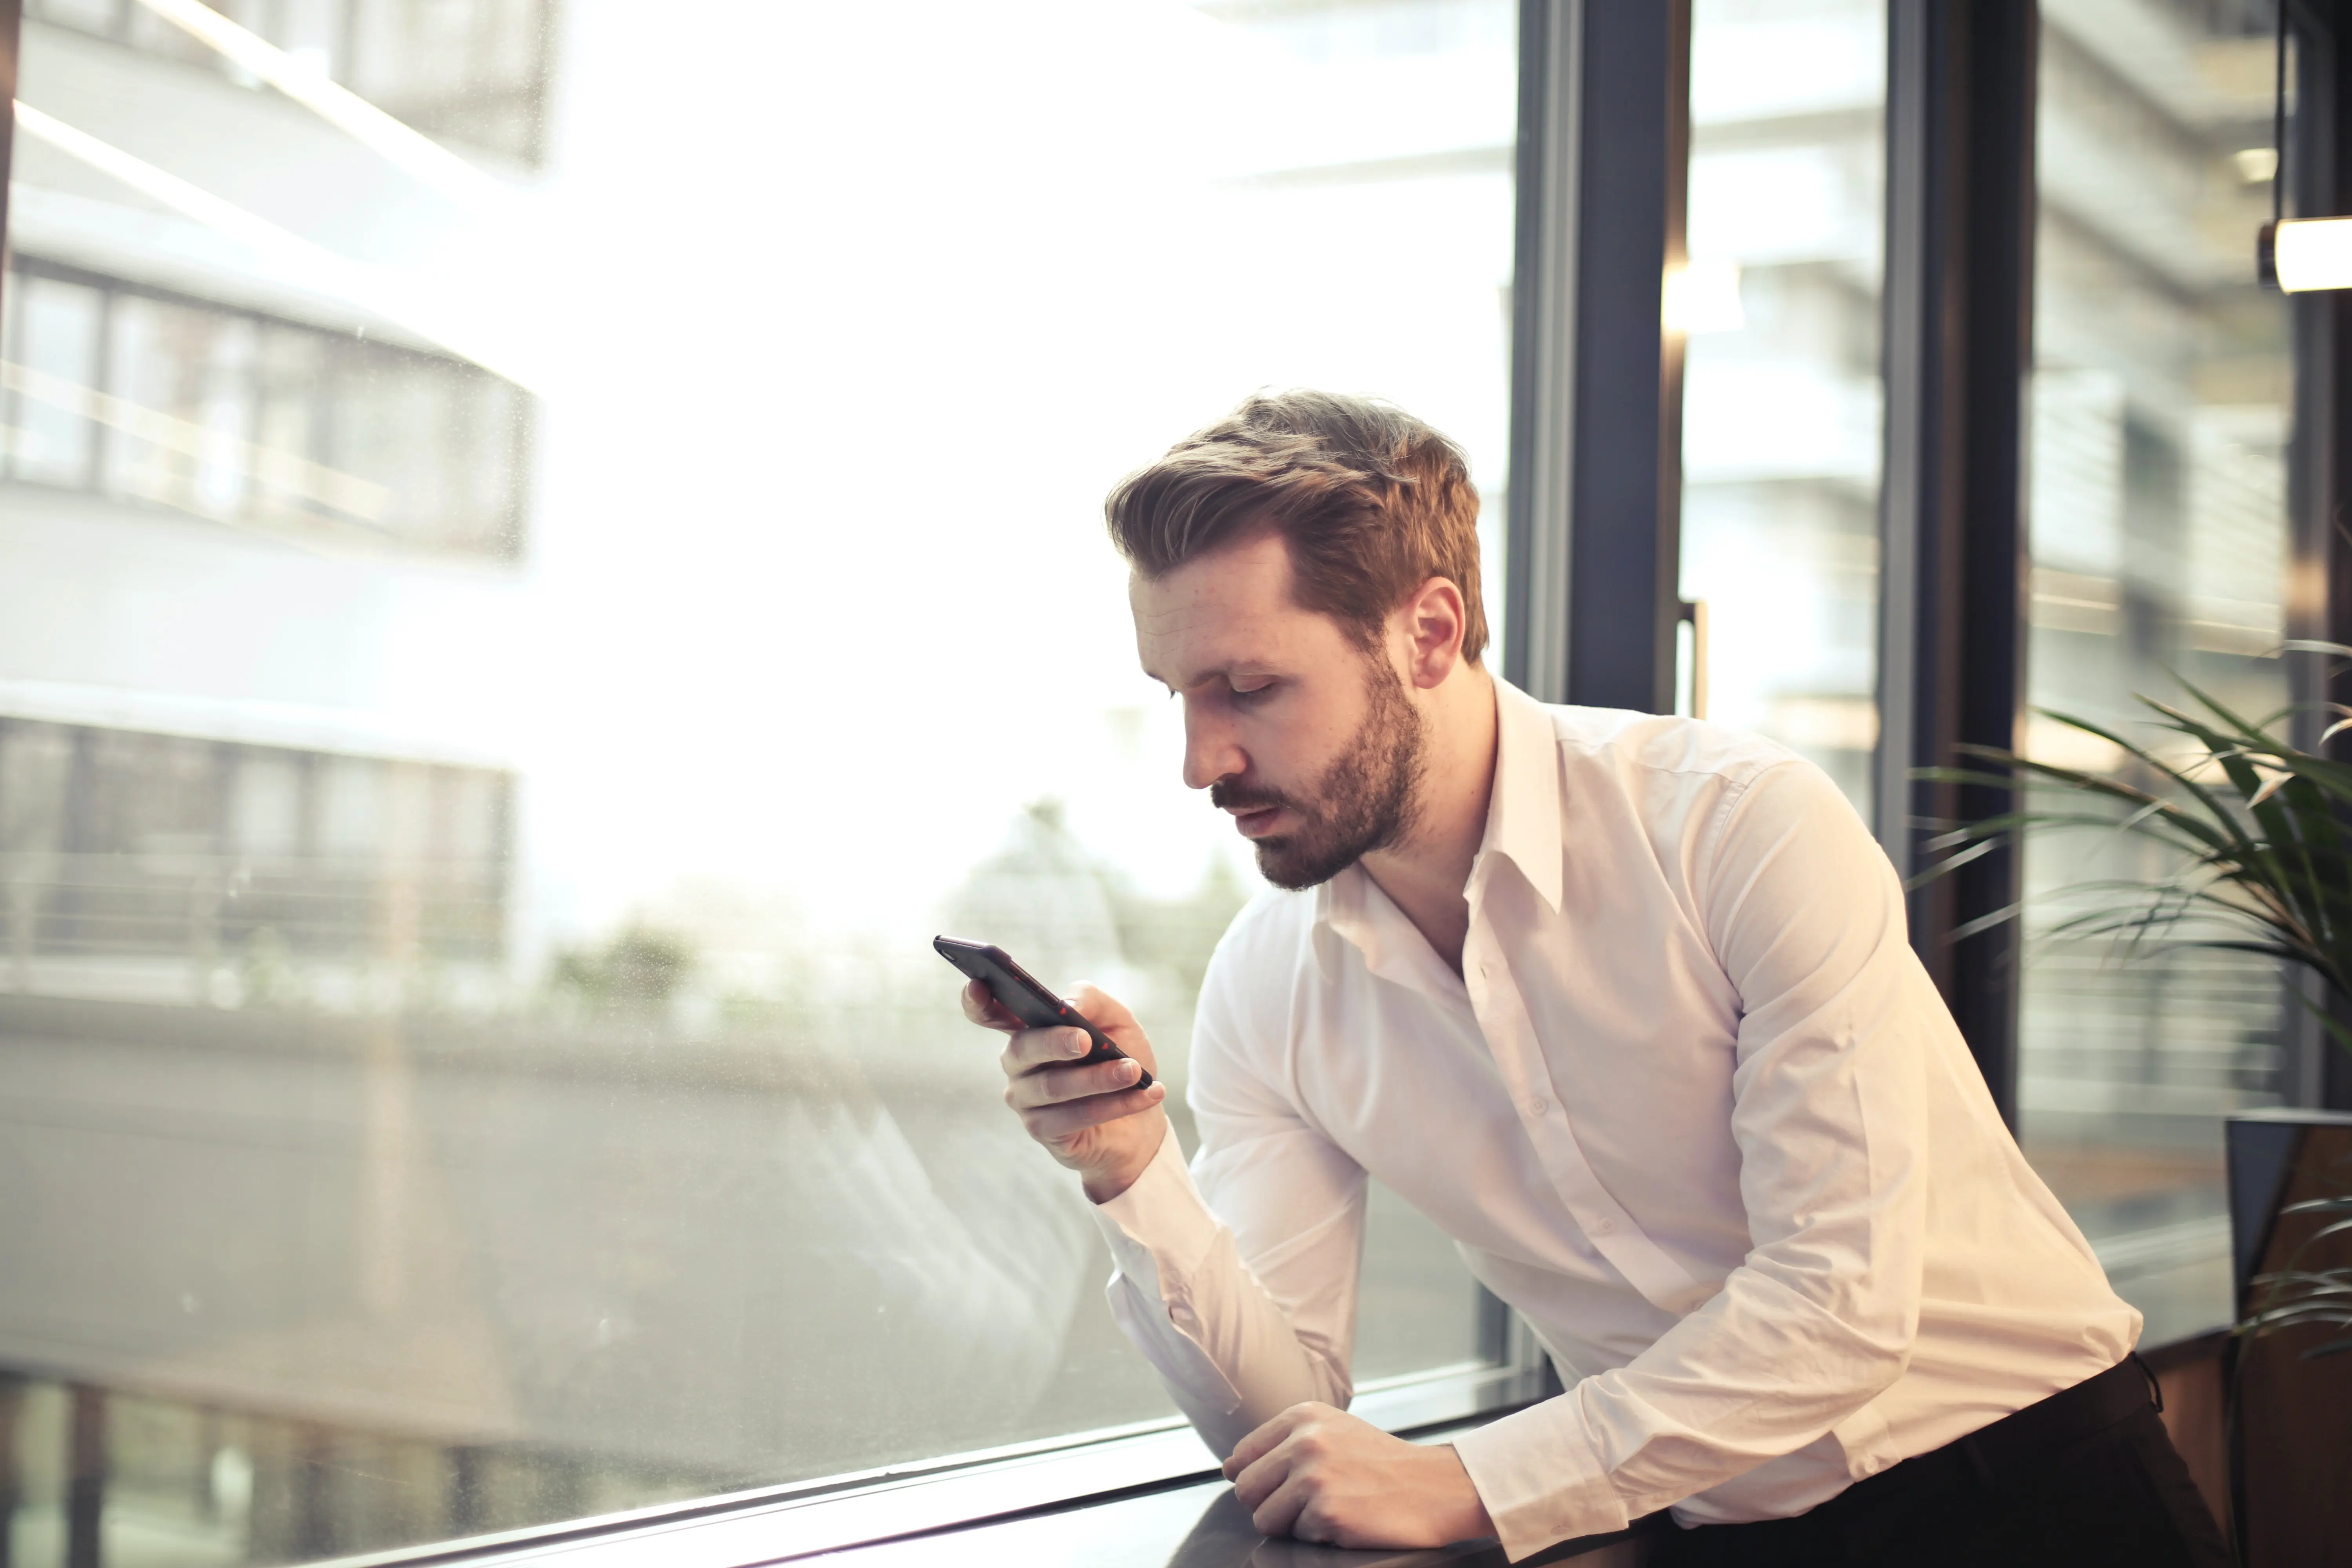 Man in white shirt looking at phone in front of window